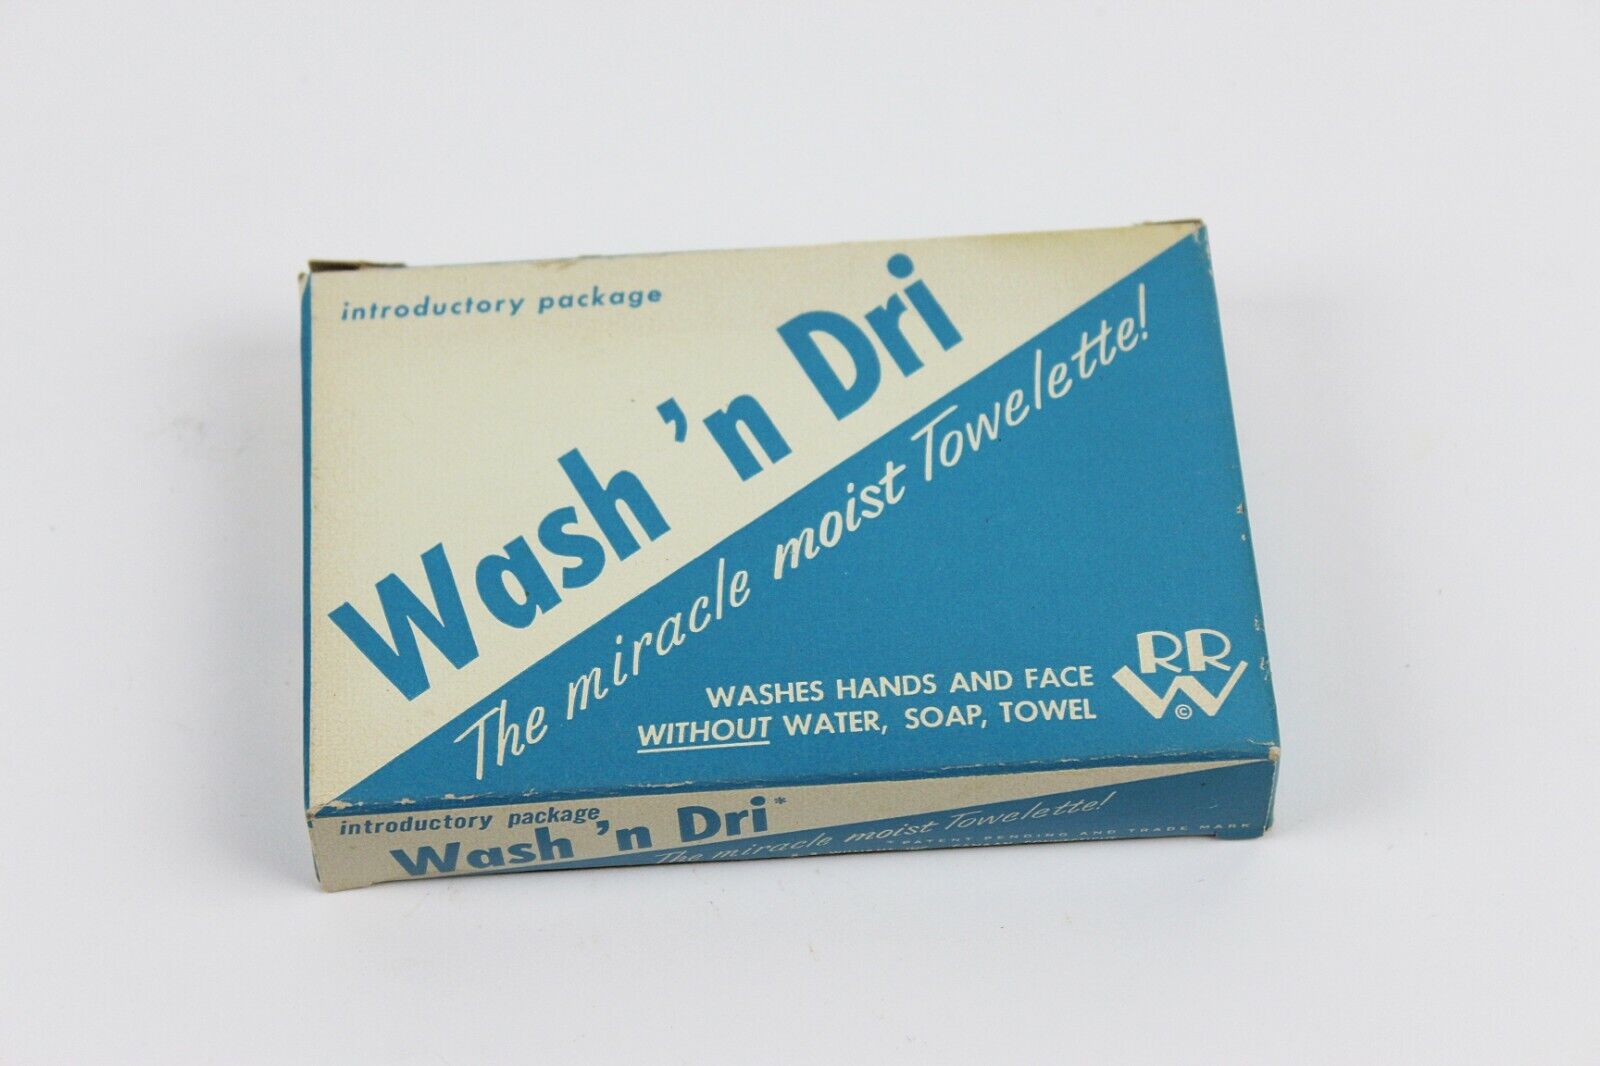 Vintage 1940s/50s Wash 'n Dri Towelettes in Introductory Package Dental RARE